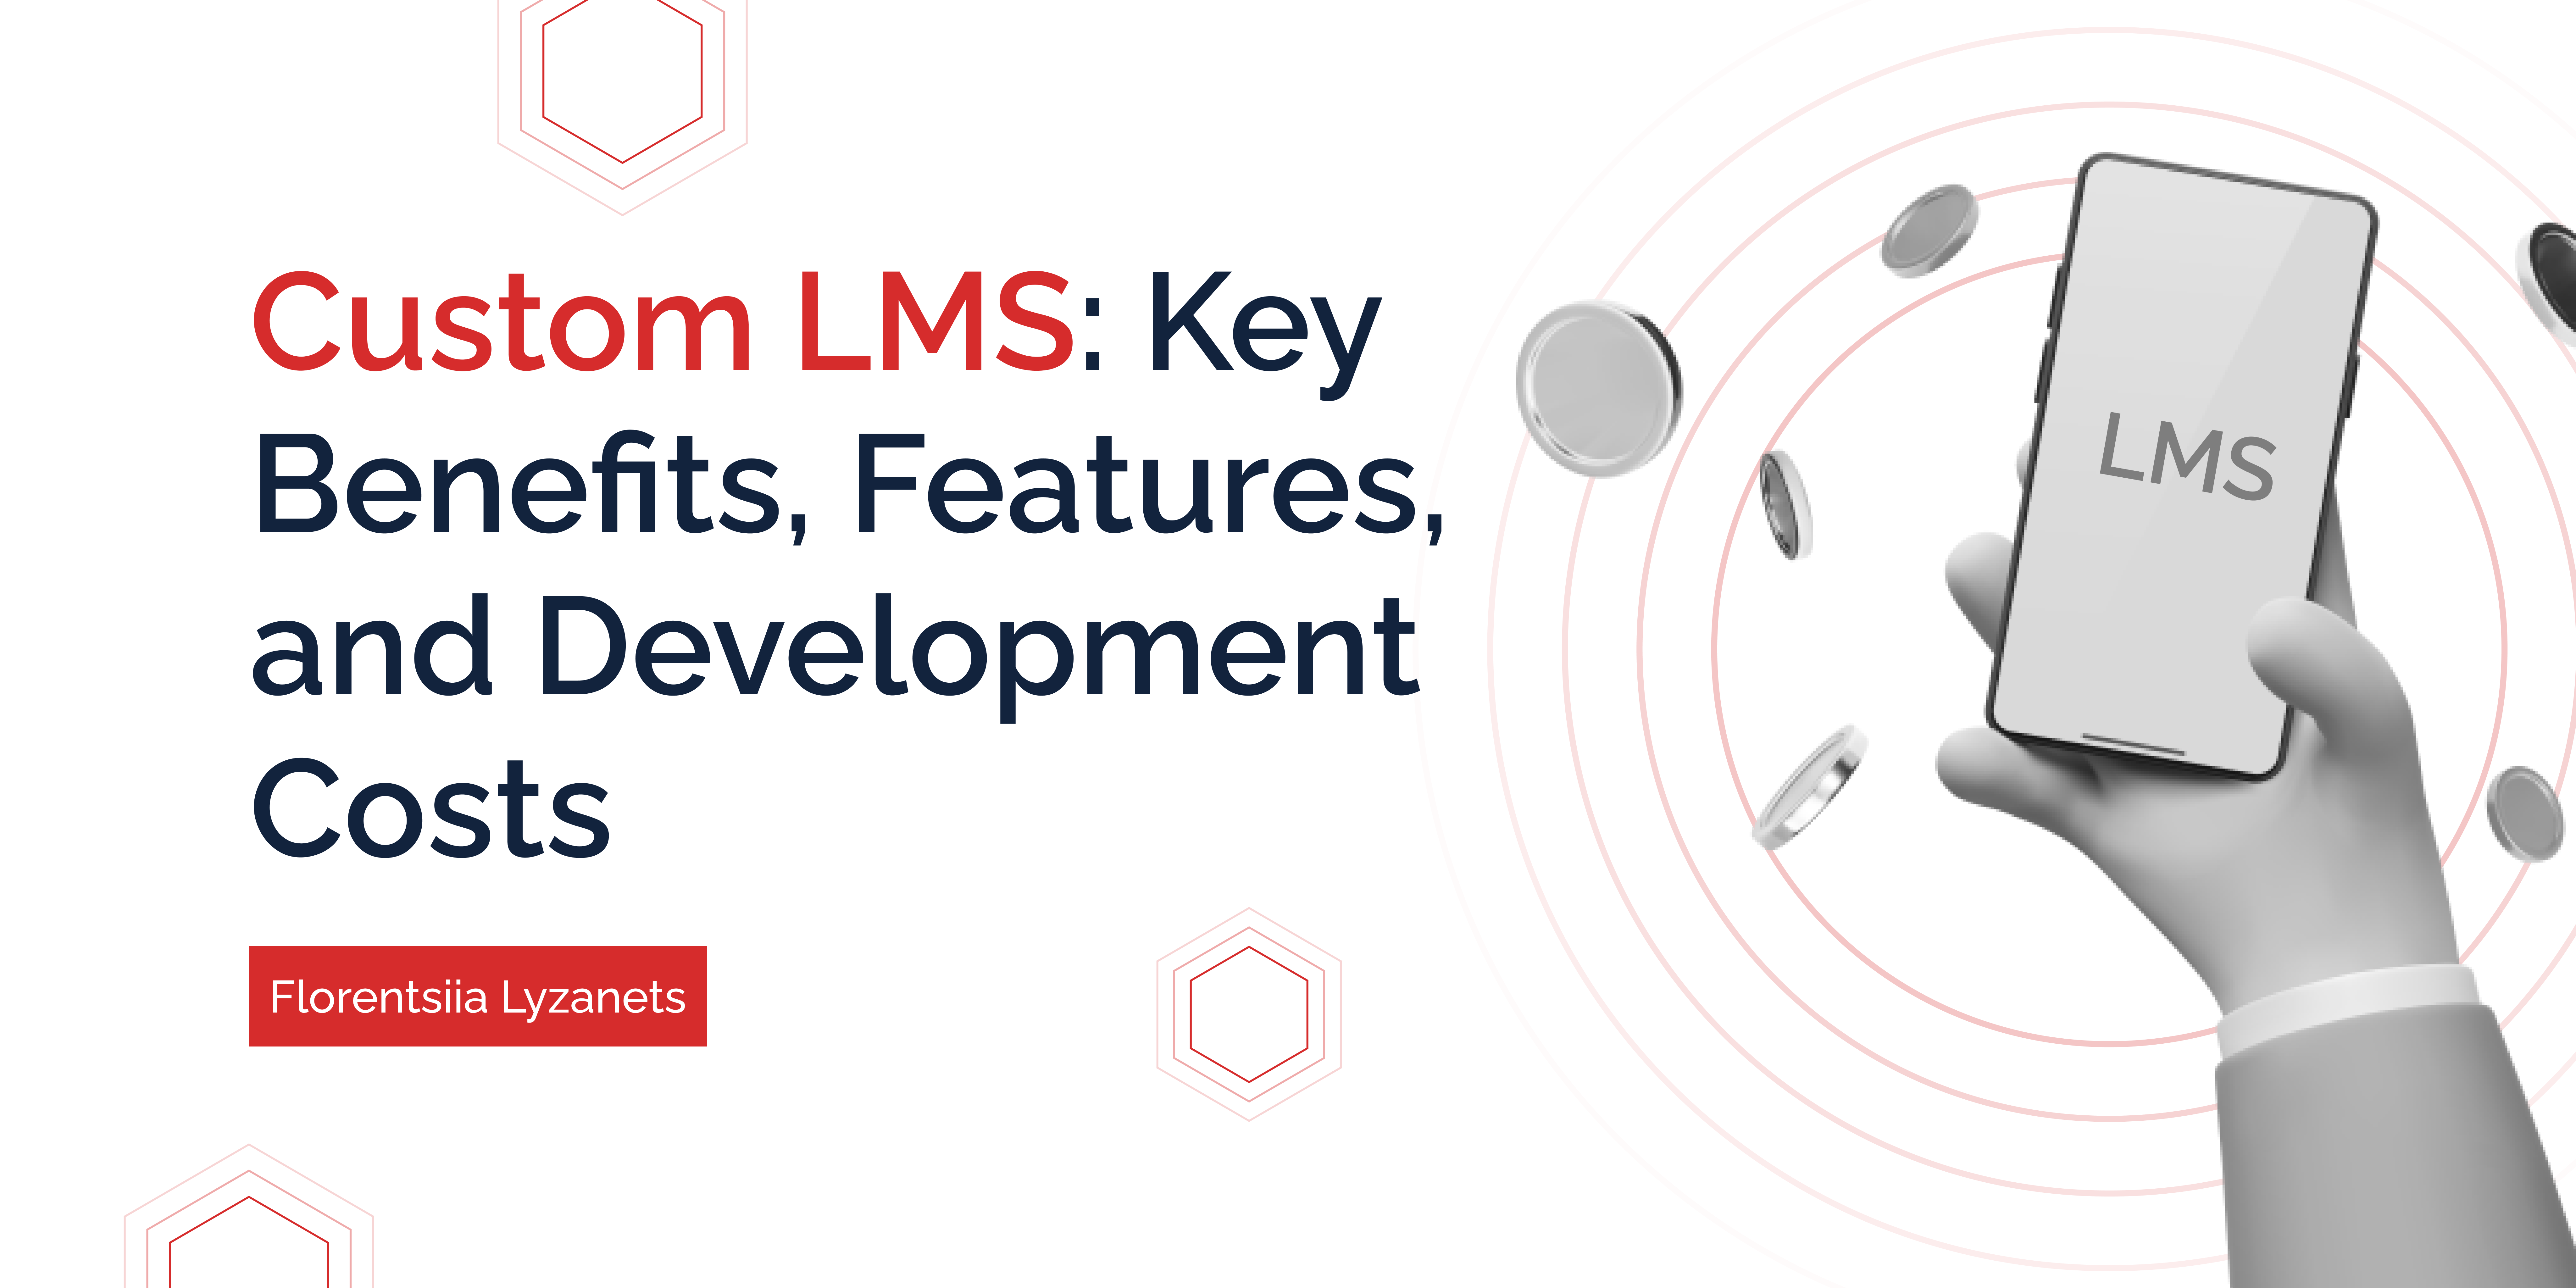 Custom LMS: Key benefits, features, and development costs